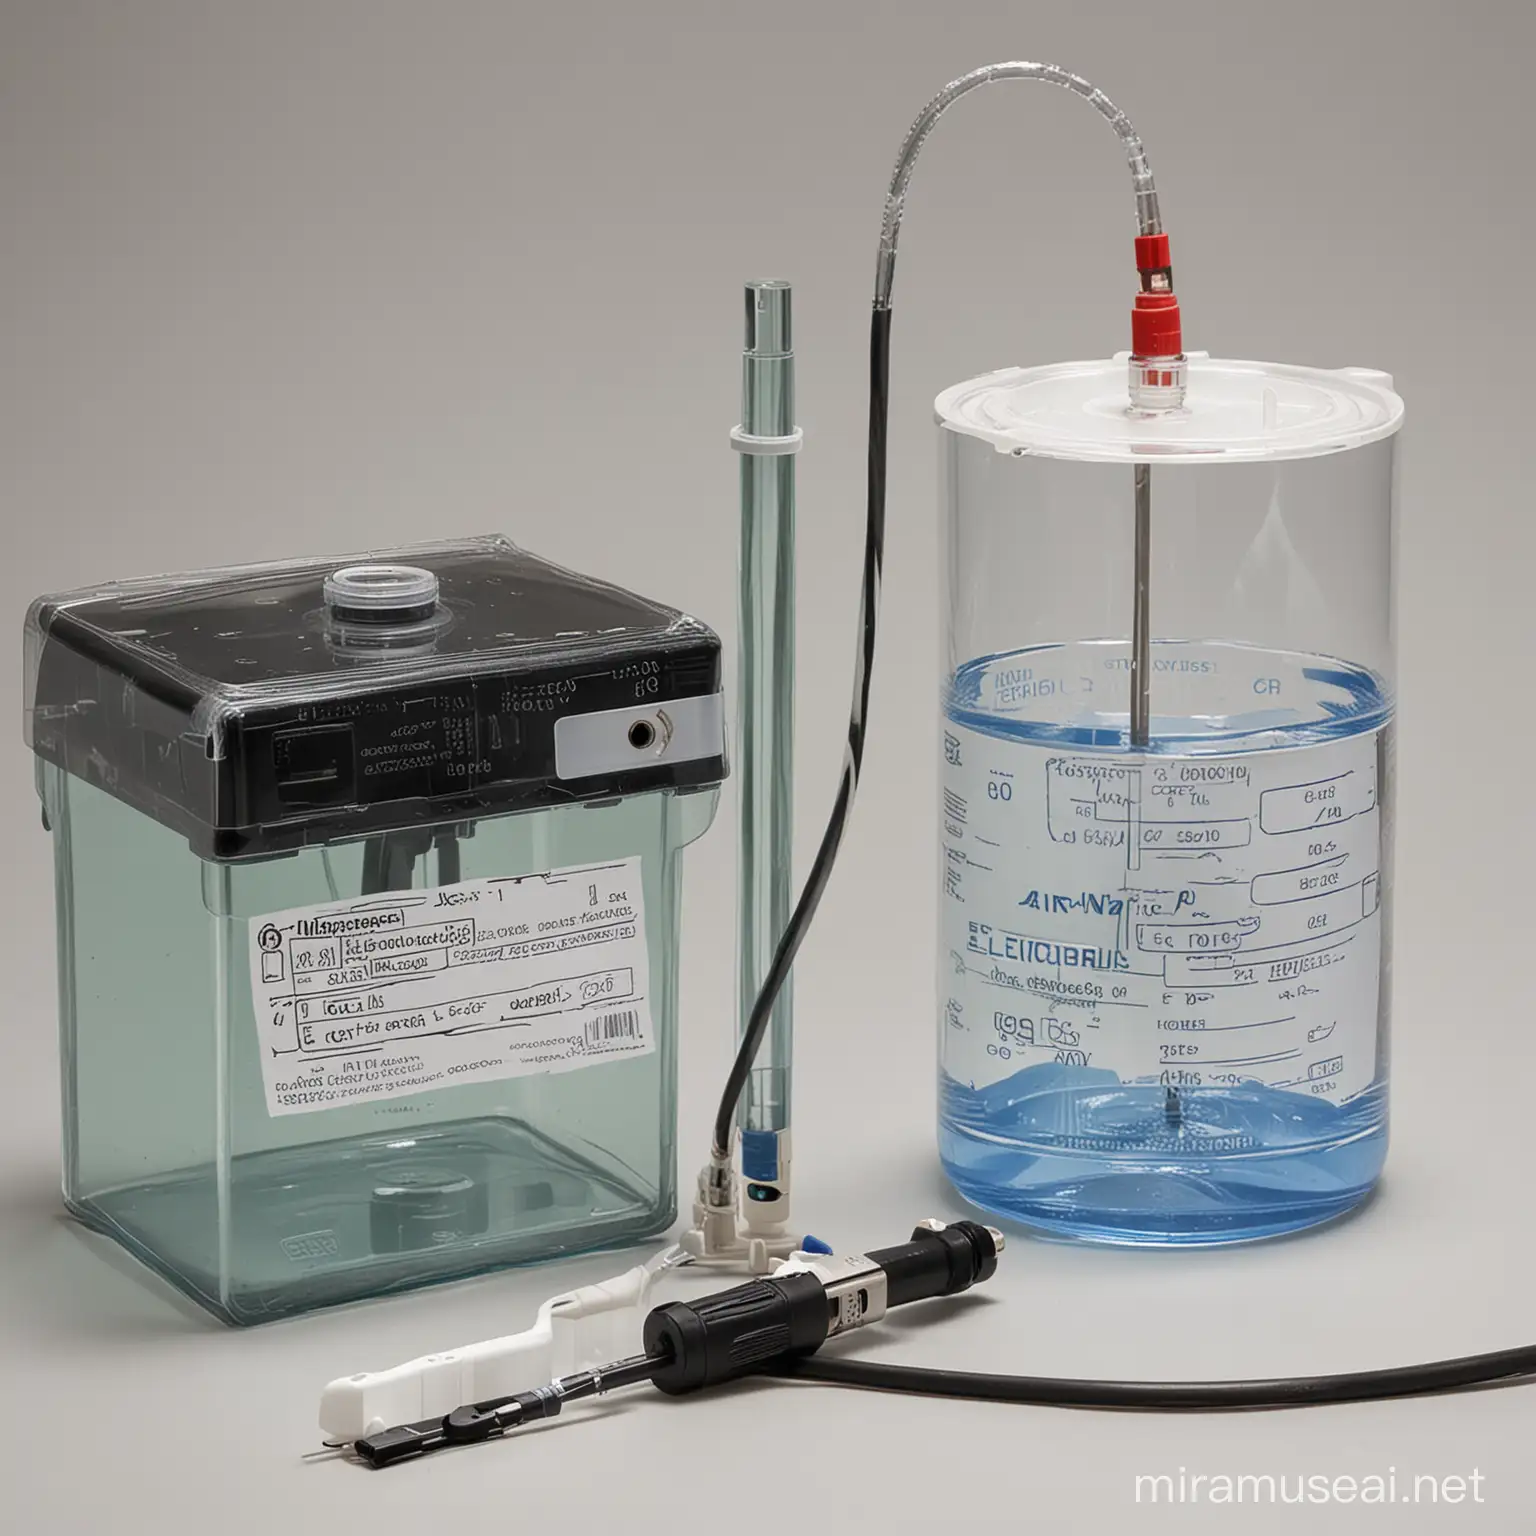 experimental setup : At the center of the setup is a transparent electrolysis cell, 



 This cell contains two electrodes: one anode made of Cassava Peel-Derived Carbon (CPC) and one cathode coated with nickel

. The electrodes are connected to an electrical power supply

To the left, there is a container labeled "Cassava Peel-Derived Carbon (CPC)" filled with processed CPC material

Next to it, a similar container holds the **anion exchange membrane: material** 

 a small tank contains the **1 M KOH electrolyte solution: liquid**, which fills the electrolysis cell and enables the ion transport necessary for the reaction.

there is a gas syringe connected to the electrolysis cell via tubing,

 representing the collection of hydrogen and oxygen gases produced during the electrolysis process. Adjacent to the **gas syringe is a data recording device,** indicating the measurement and analysis of gas volume and other relevant parameters throughout the experiment.